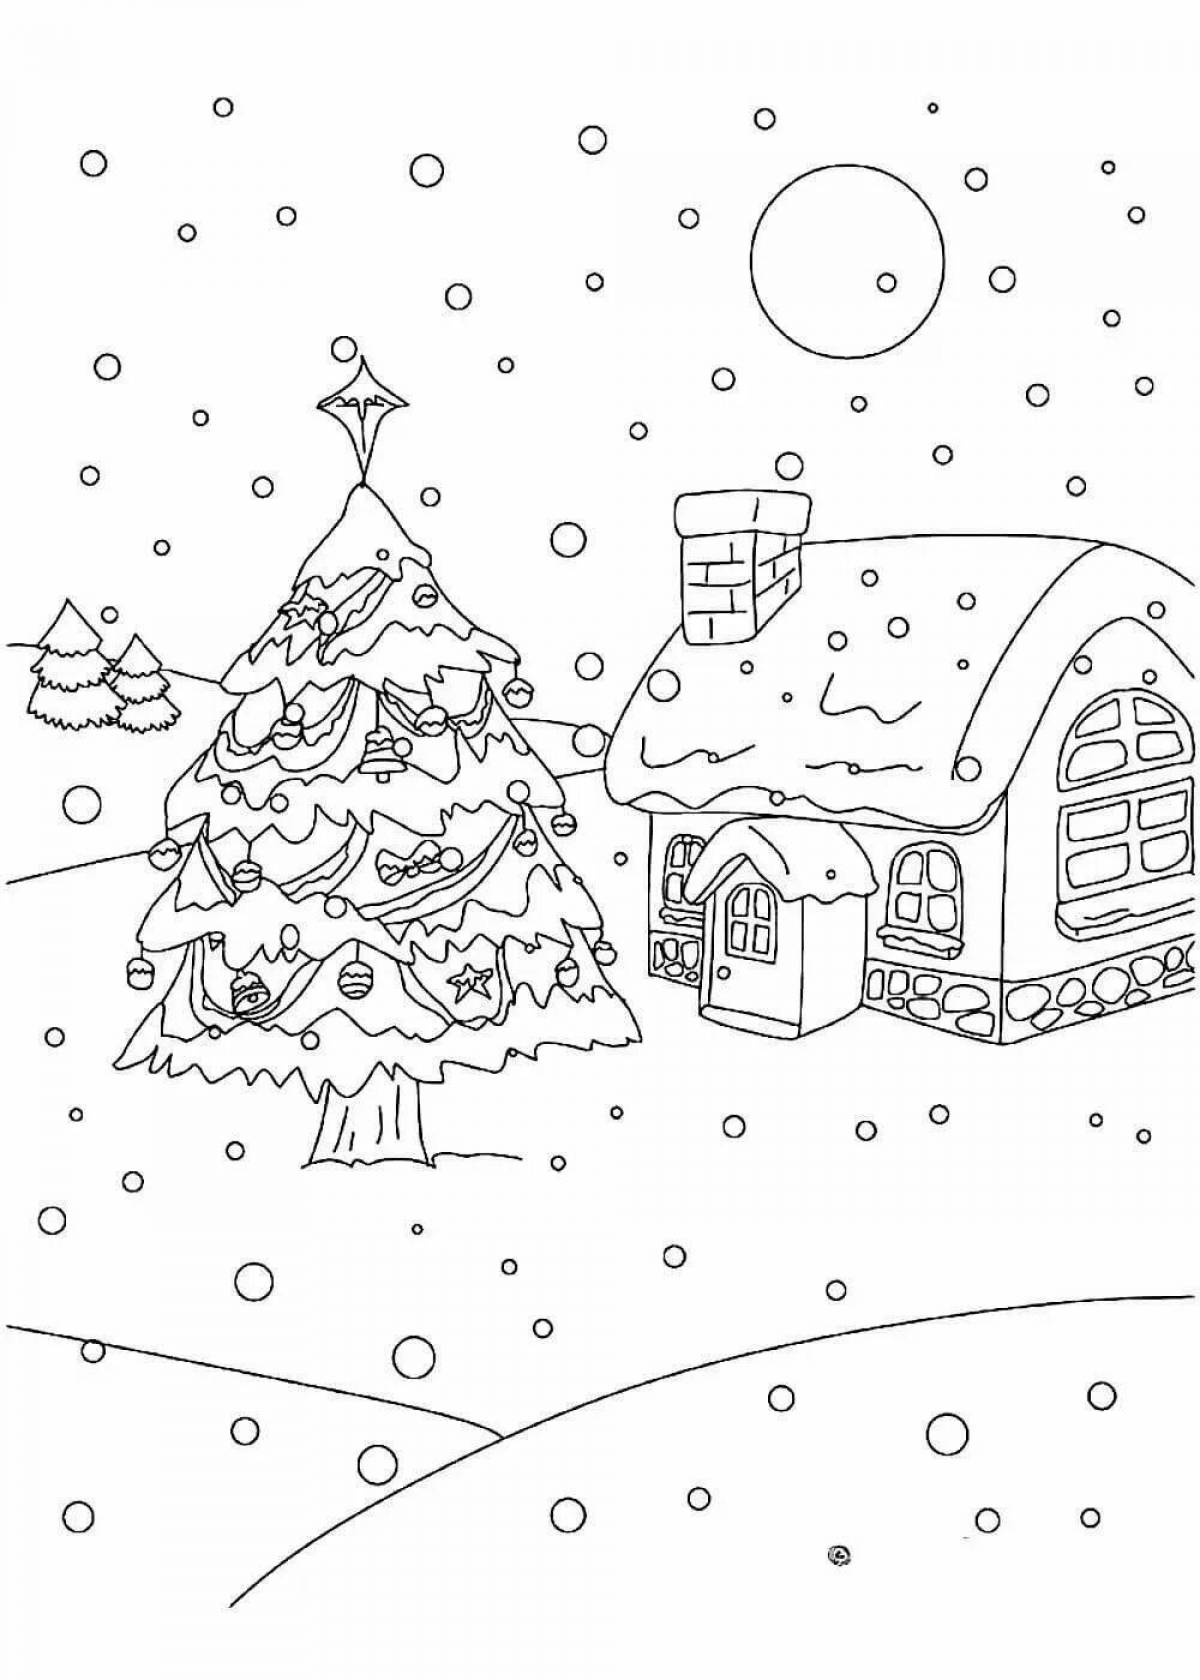 Magic snowing coloring book for kids